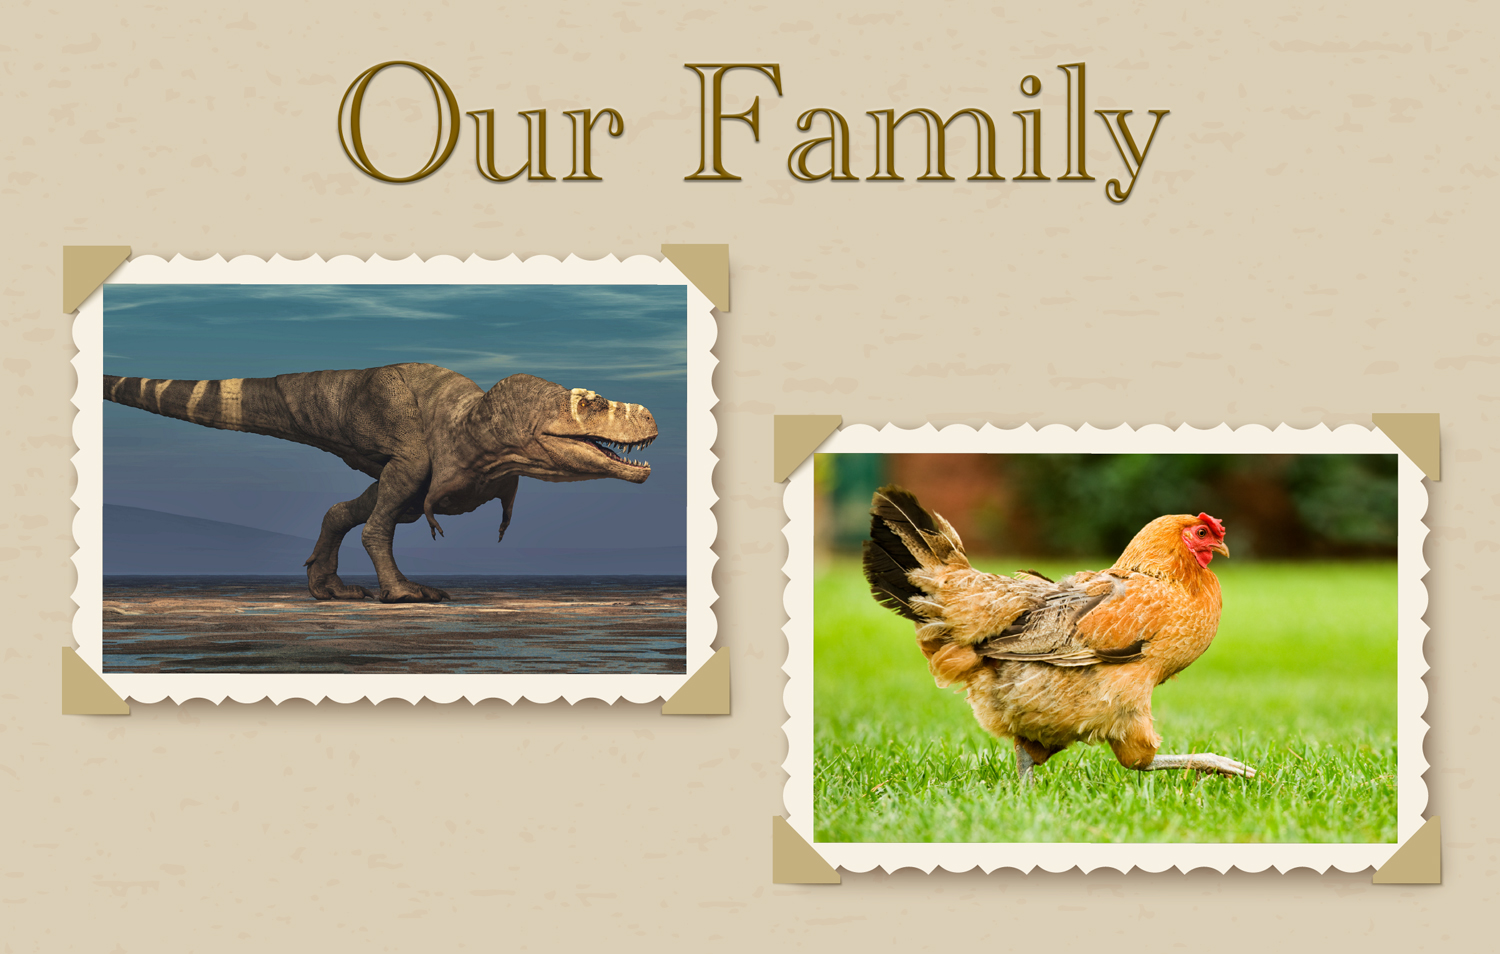 A page titled Our Family features pasted in photos of a T rex and a chicken in similar poses.